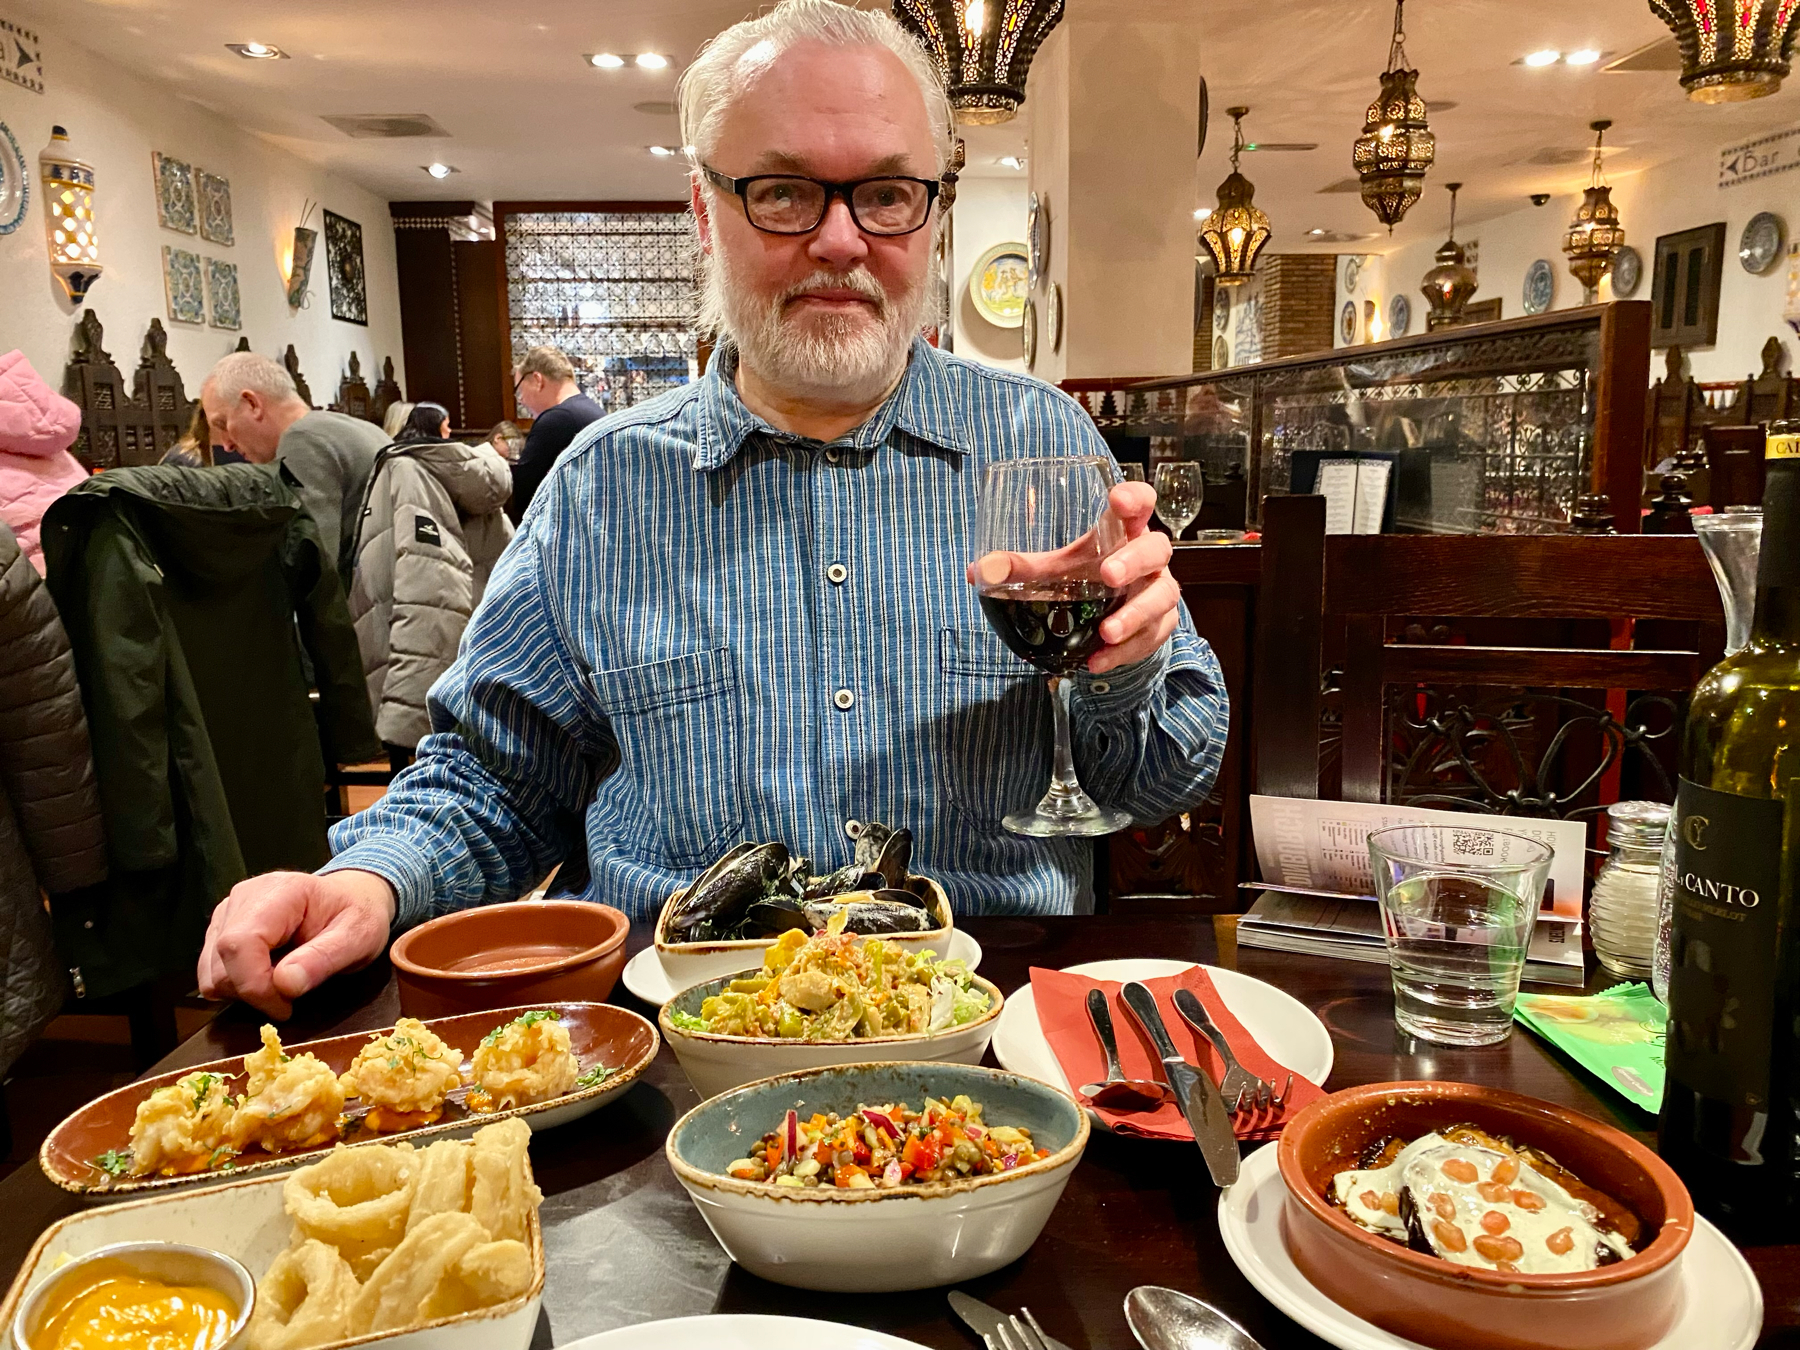 Man holding a glass of wine at a table covered with small plates of food